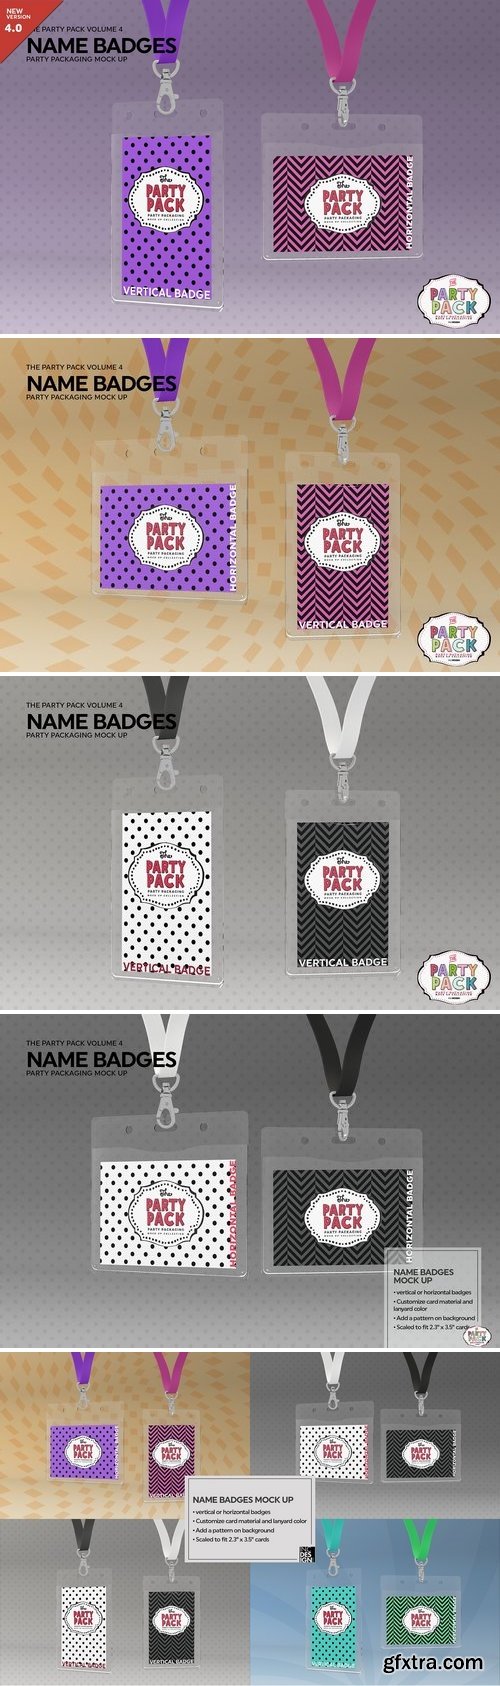 CM - Name Badges with Lanyards Mock Up 2199329